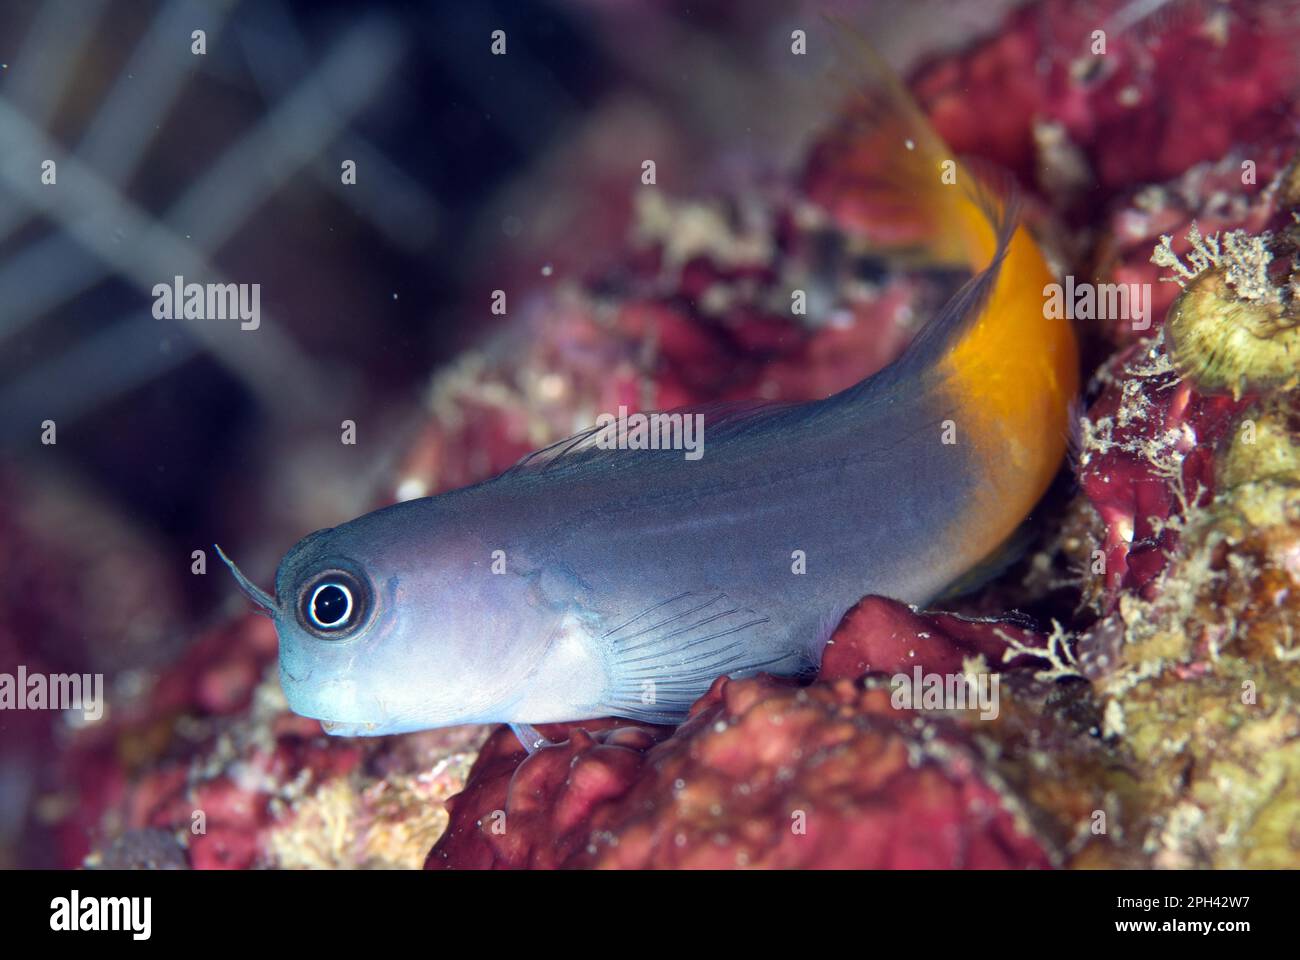 Bicolor blenny (Ecsenius bicolor), Other animals, Fish, Animals, Blennies, Bicolour Blenny adult, resting on coral, Fiabace (Four Kings), Raja Ampat Stock Photo